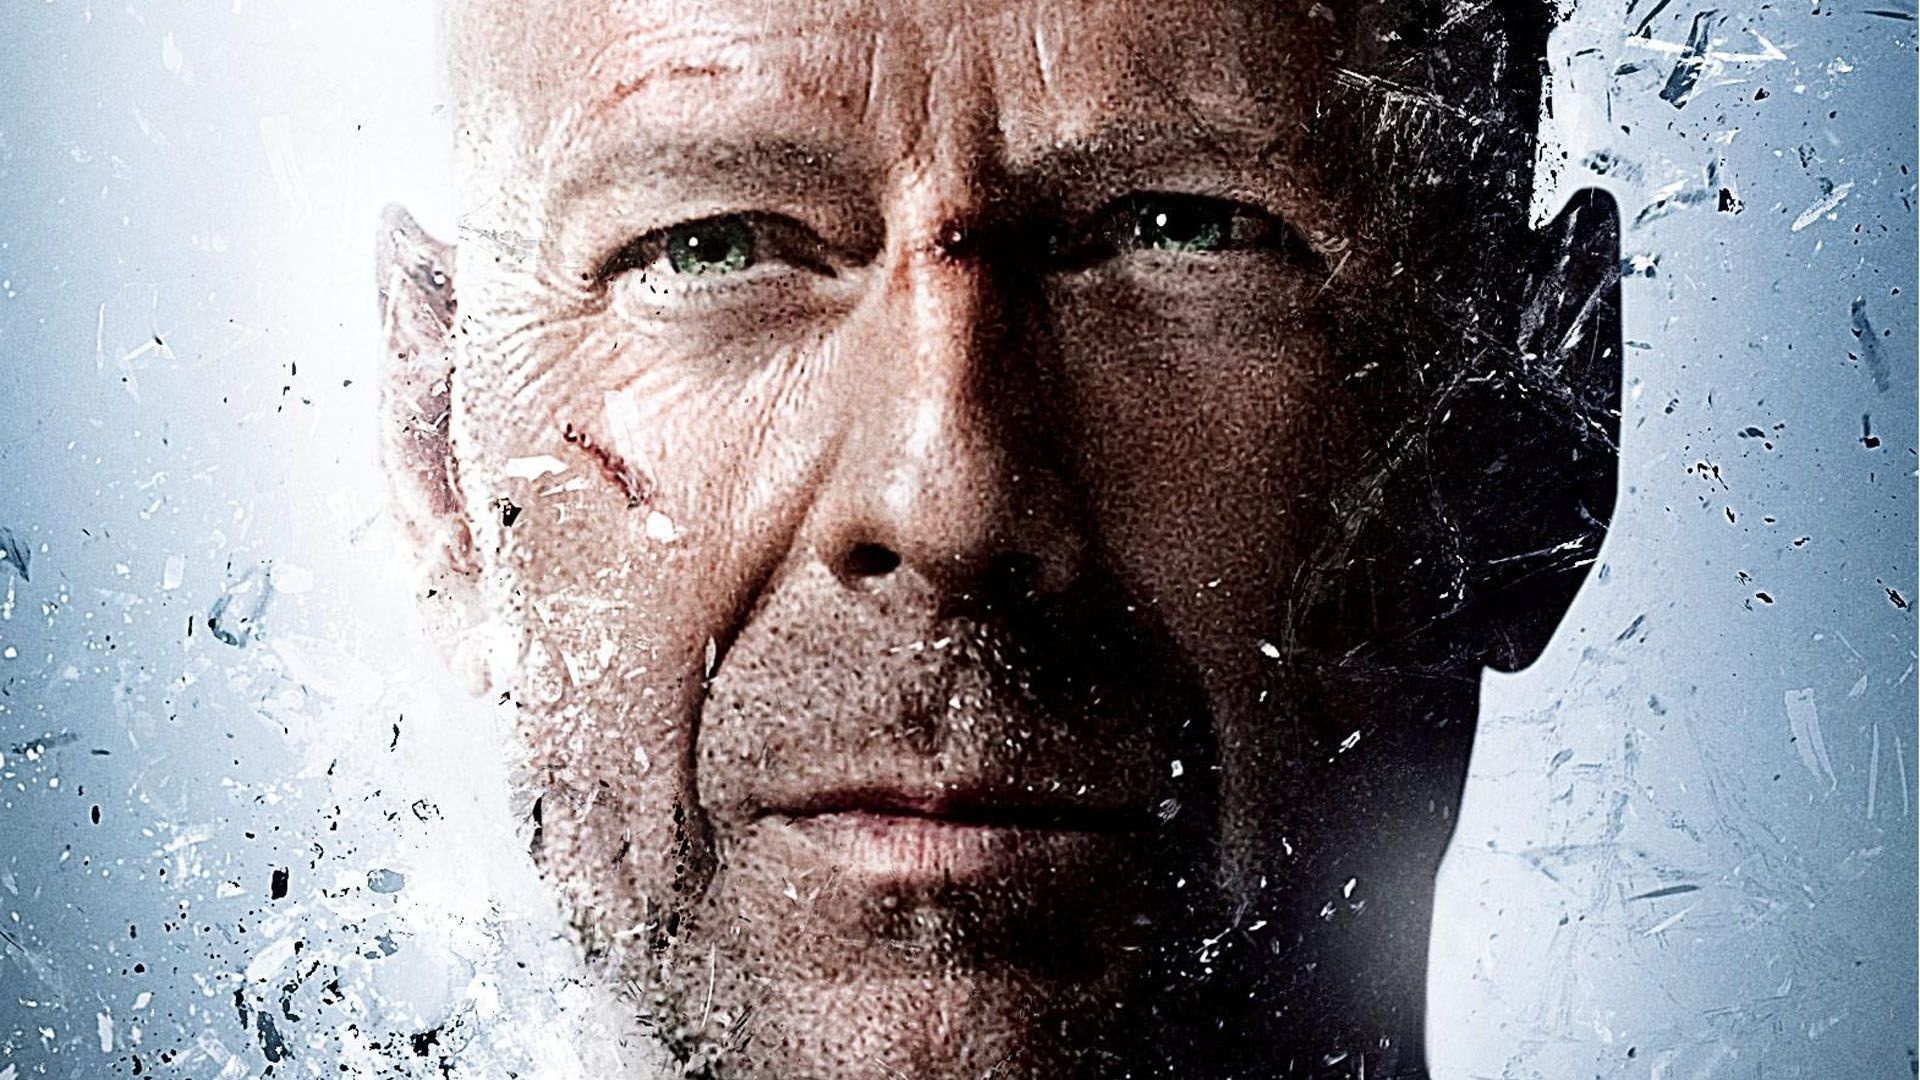 Live Free or Die Hard, Top Die Hard wallpapers, Iconic film backgrounds, Intense action, 1920x1080 Full HD Desktop